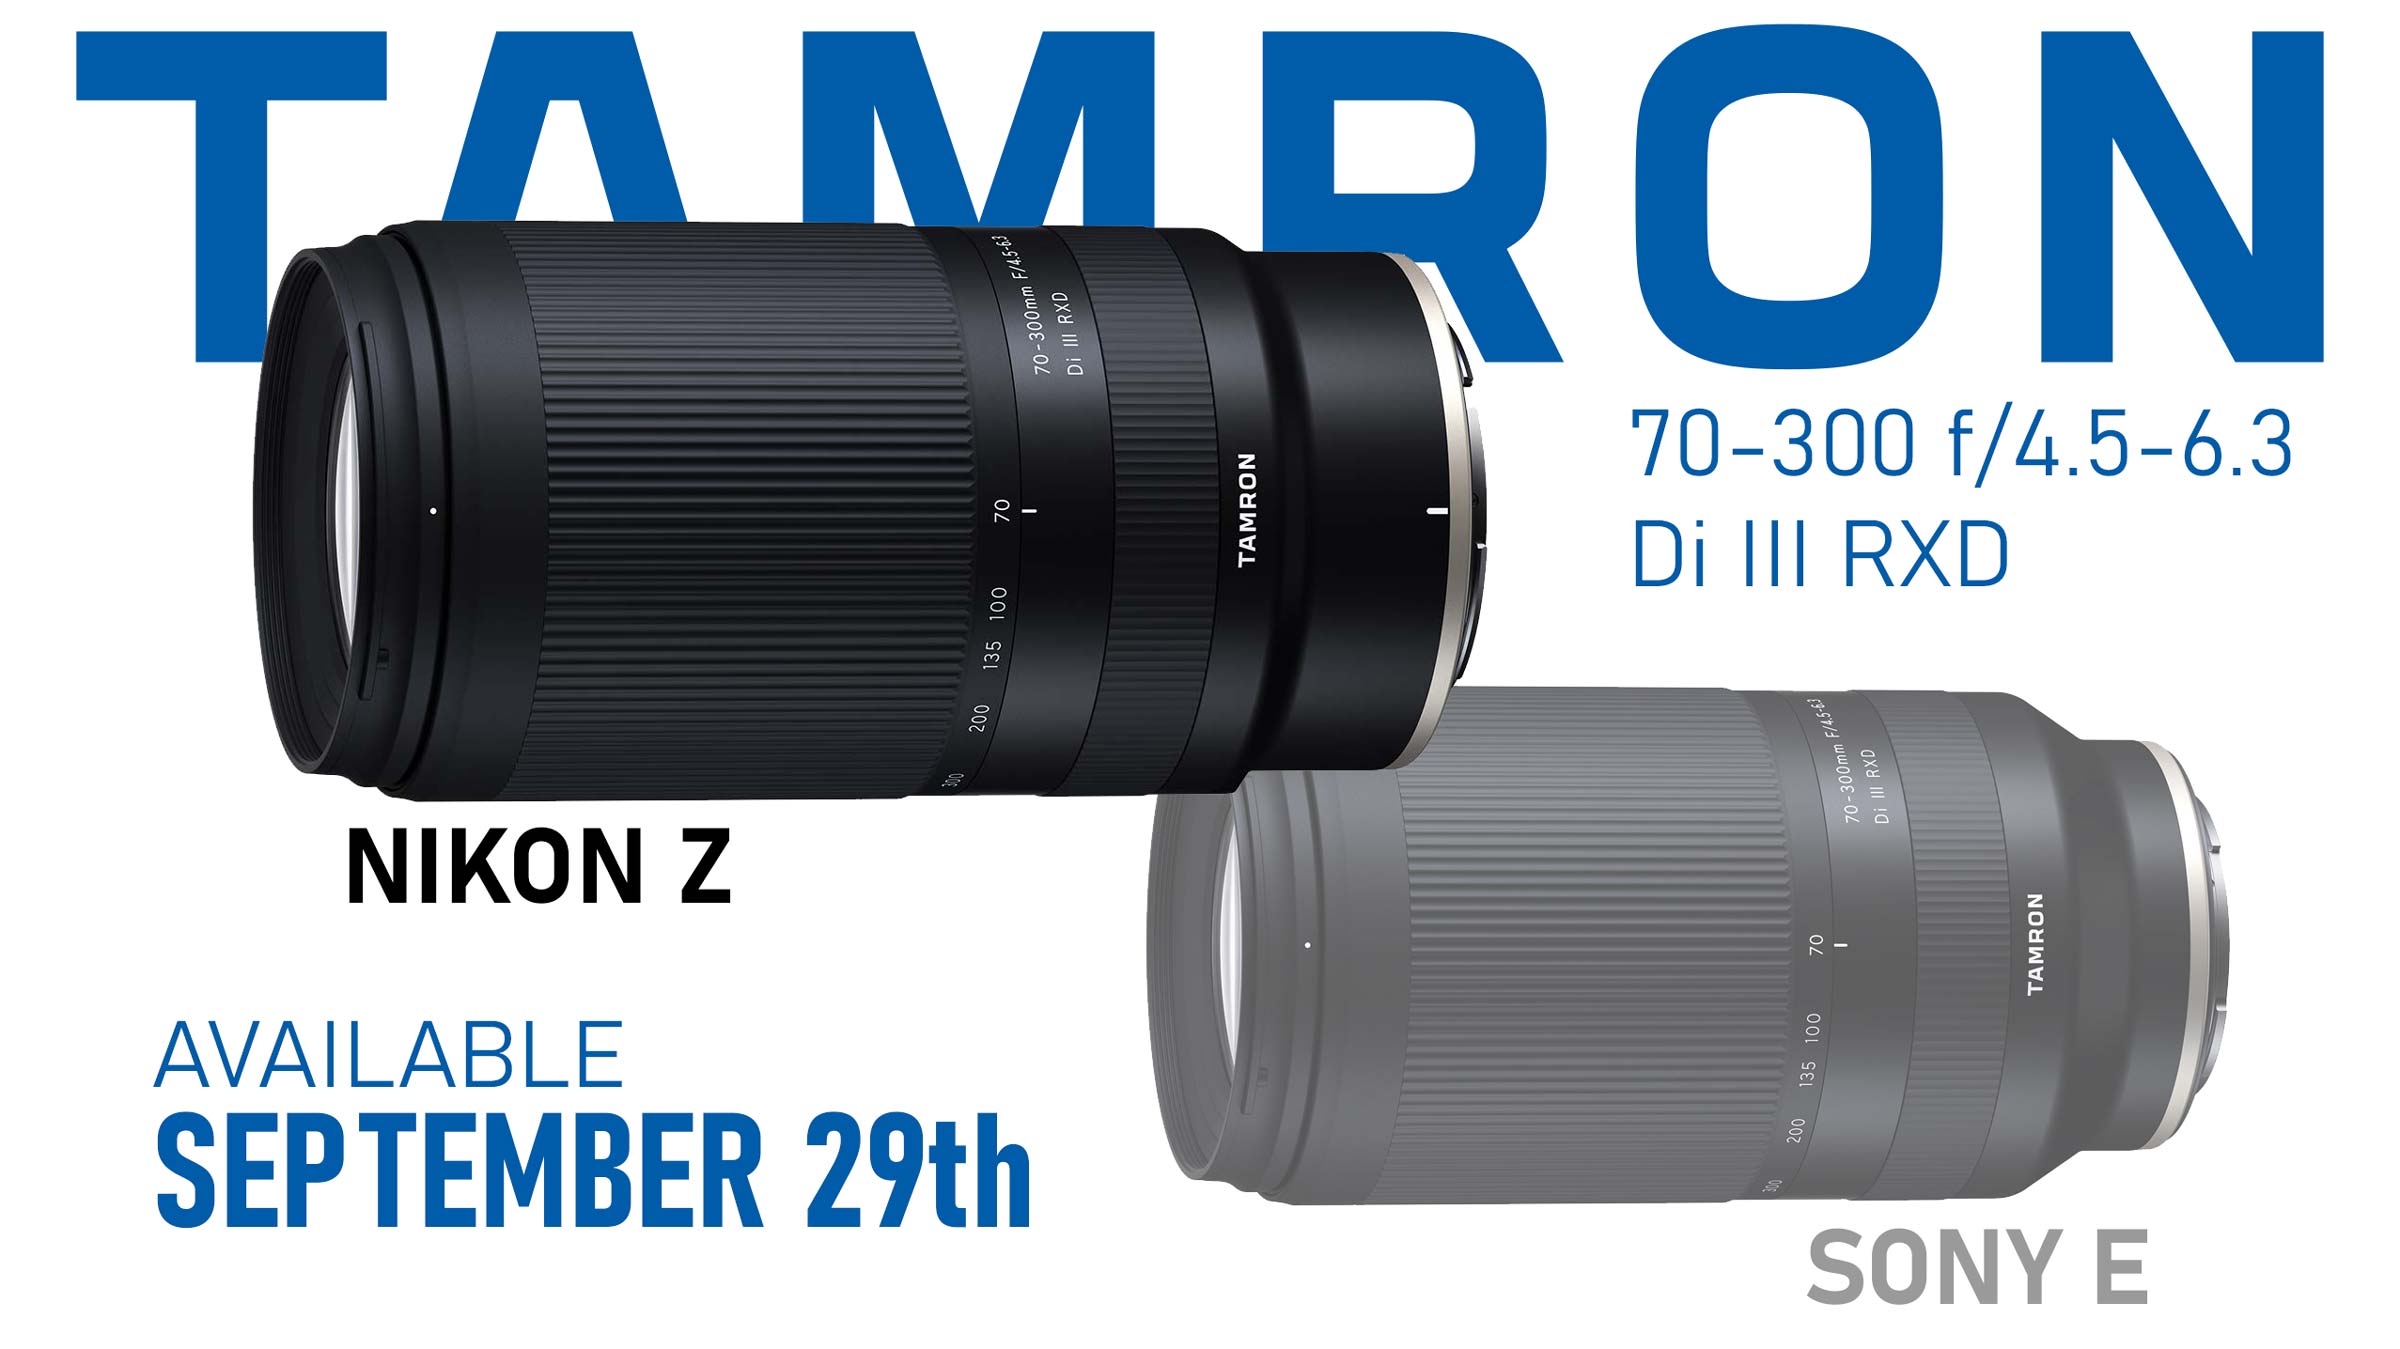 Tamron Announces Price and Release Date of new Nikon Z-Mount Lens 